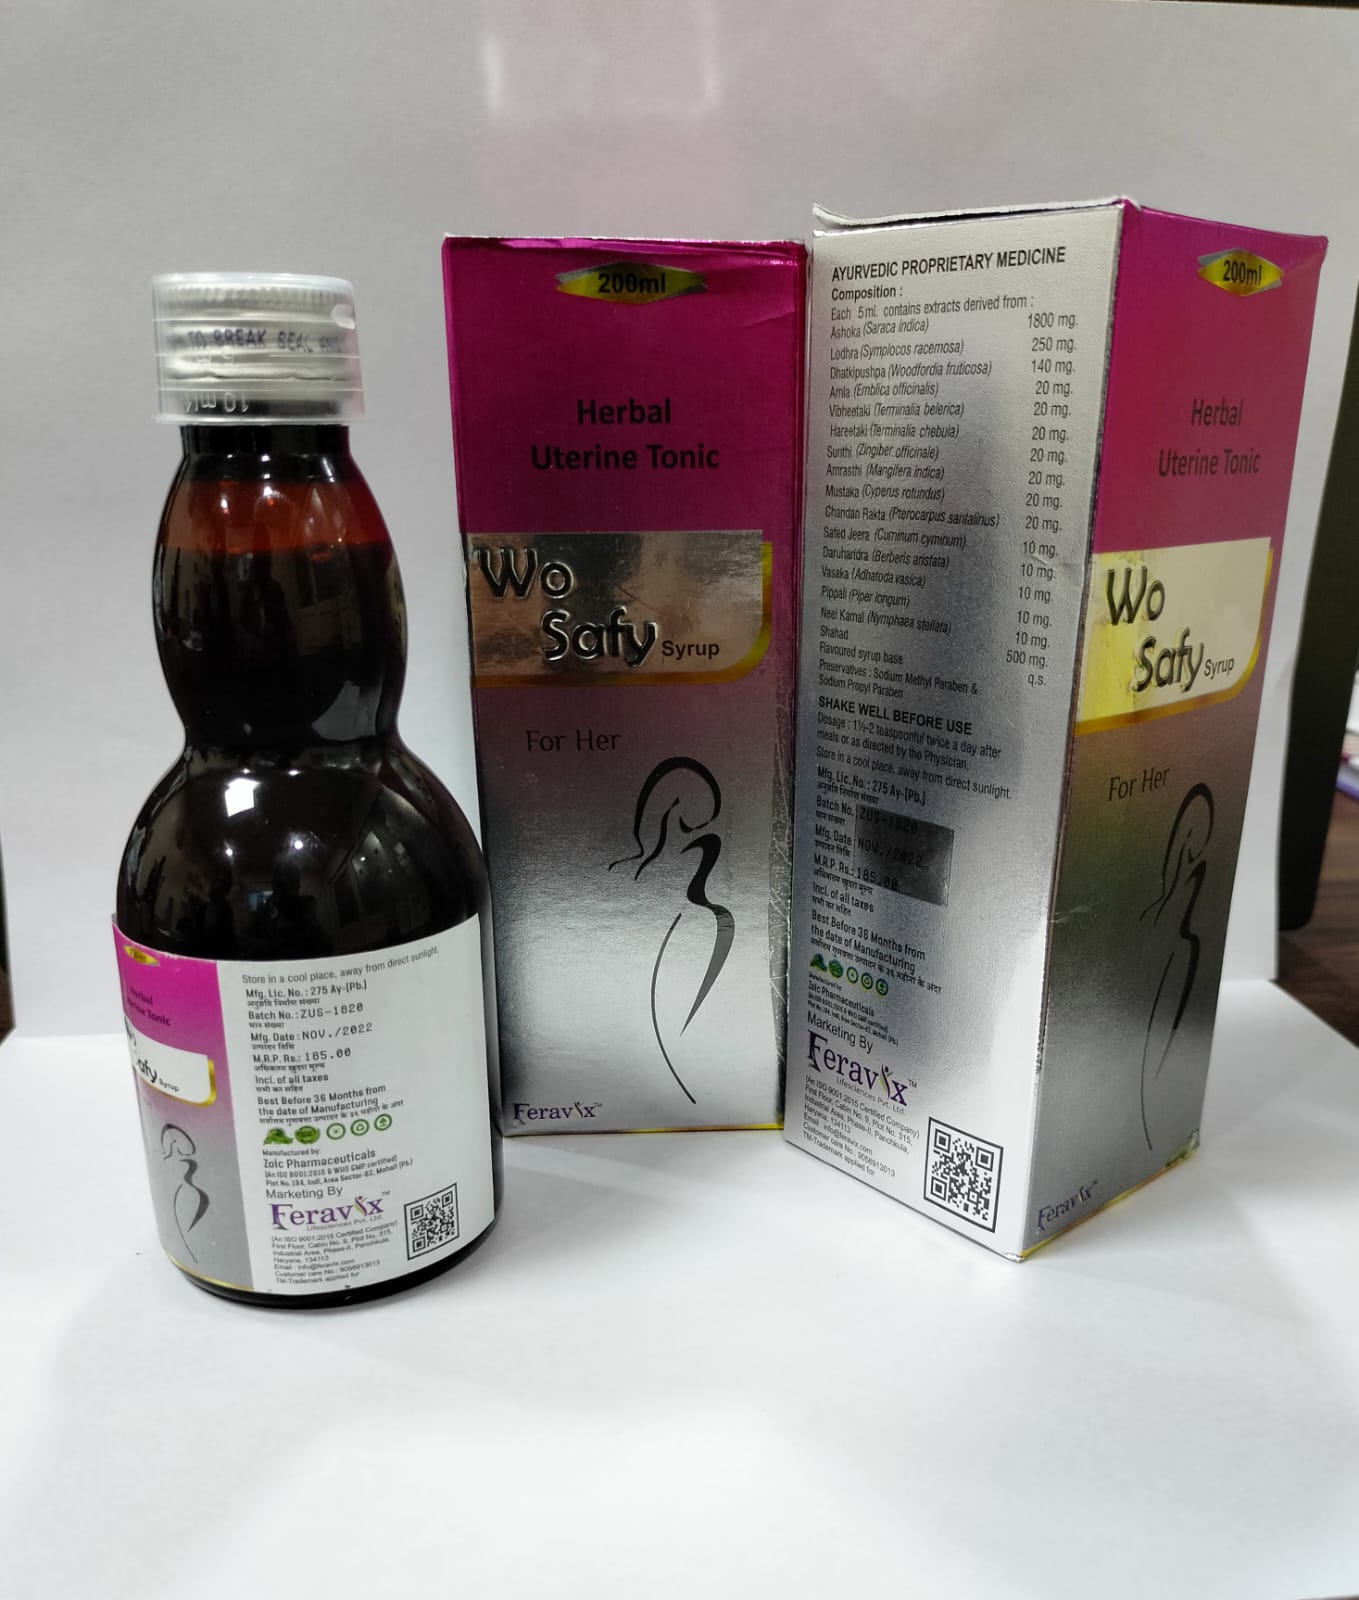 Product Name: WO SAFY Syrup, Compositions of WO SAFY Syrup are LUCORRHED (AS A PER LUECOSAFE DS) - Feravix Lifesciences